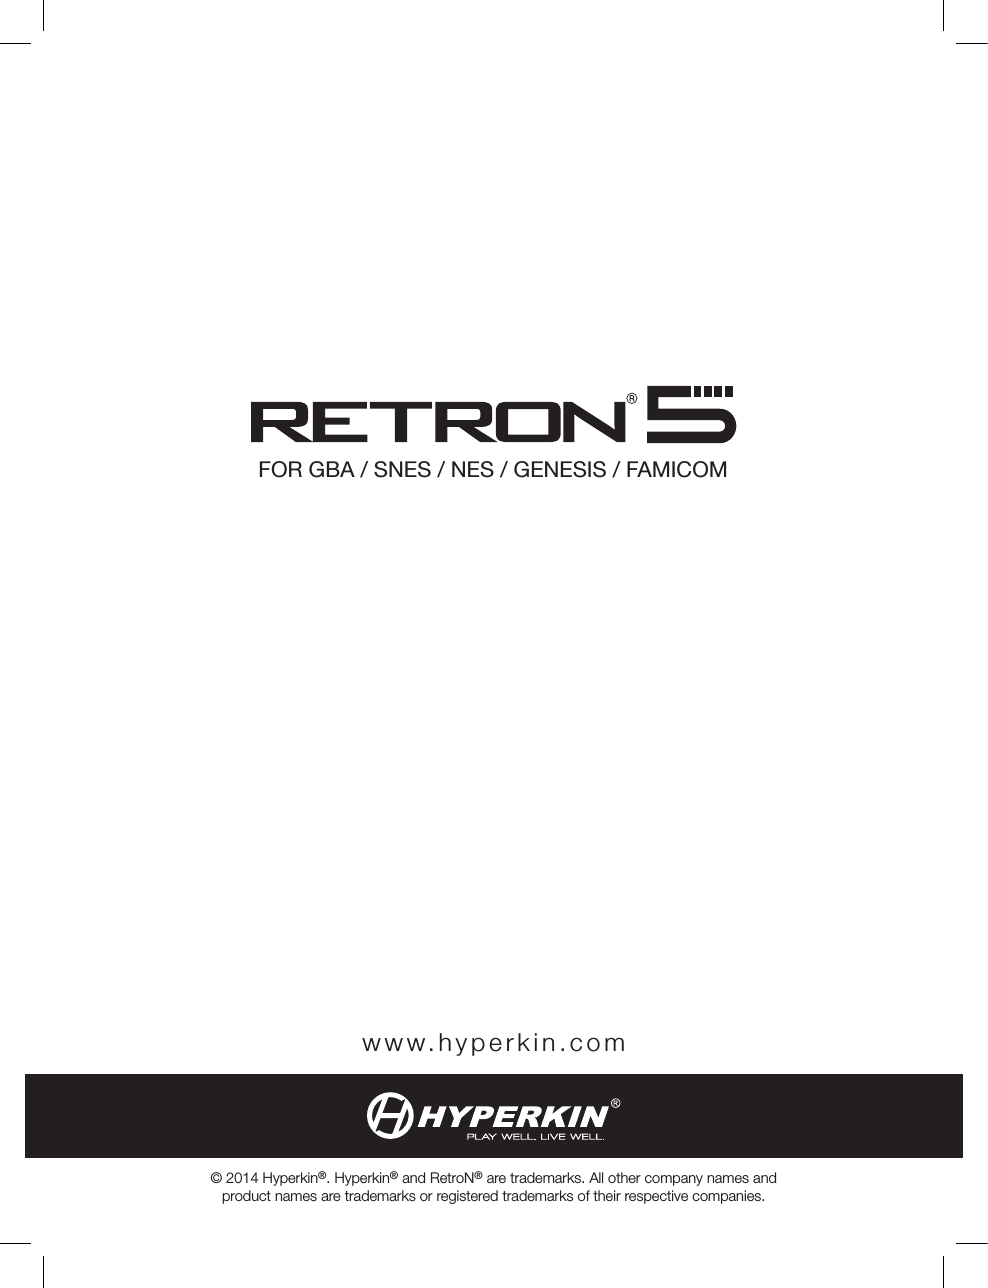 www.hyperkin.com© 2014 Hyperkin®. Hyperkin® and RetroN® are trademarks. All other company names and product names are trademarks or registered trademarks of their respective companies.FOR GBA / SNES / NES / GENESIS / FAMICOM